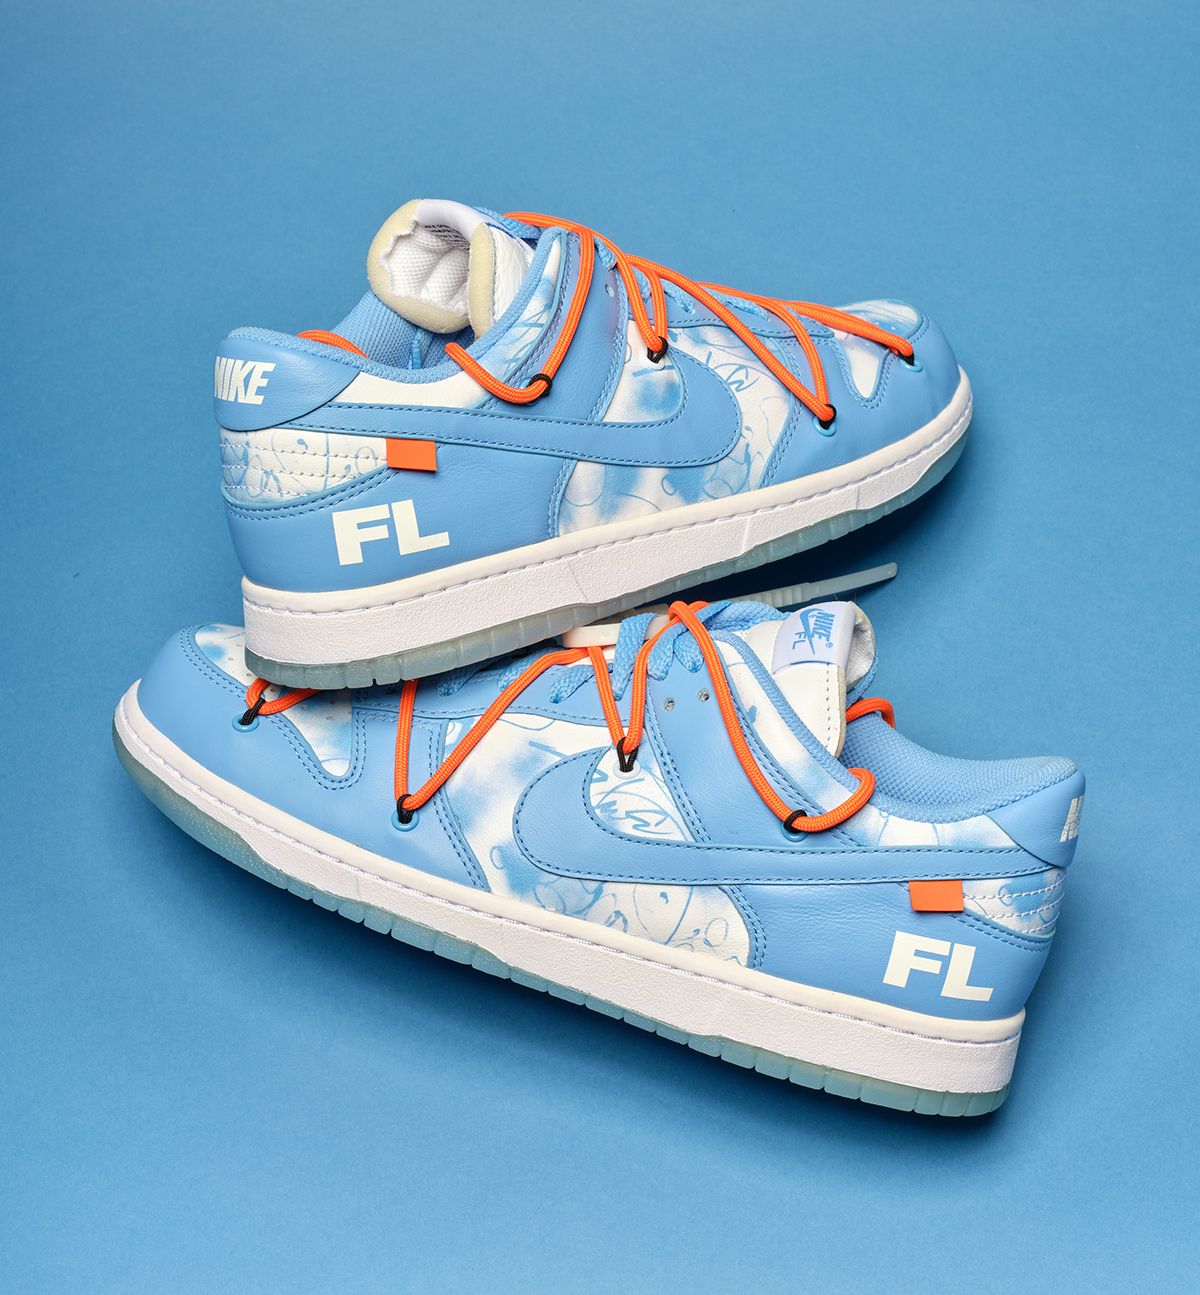 Sotheby's is Auctioning Off Eight Pairs of the OFF-WHITE x Futura x